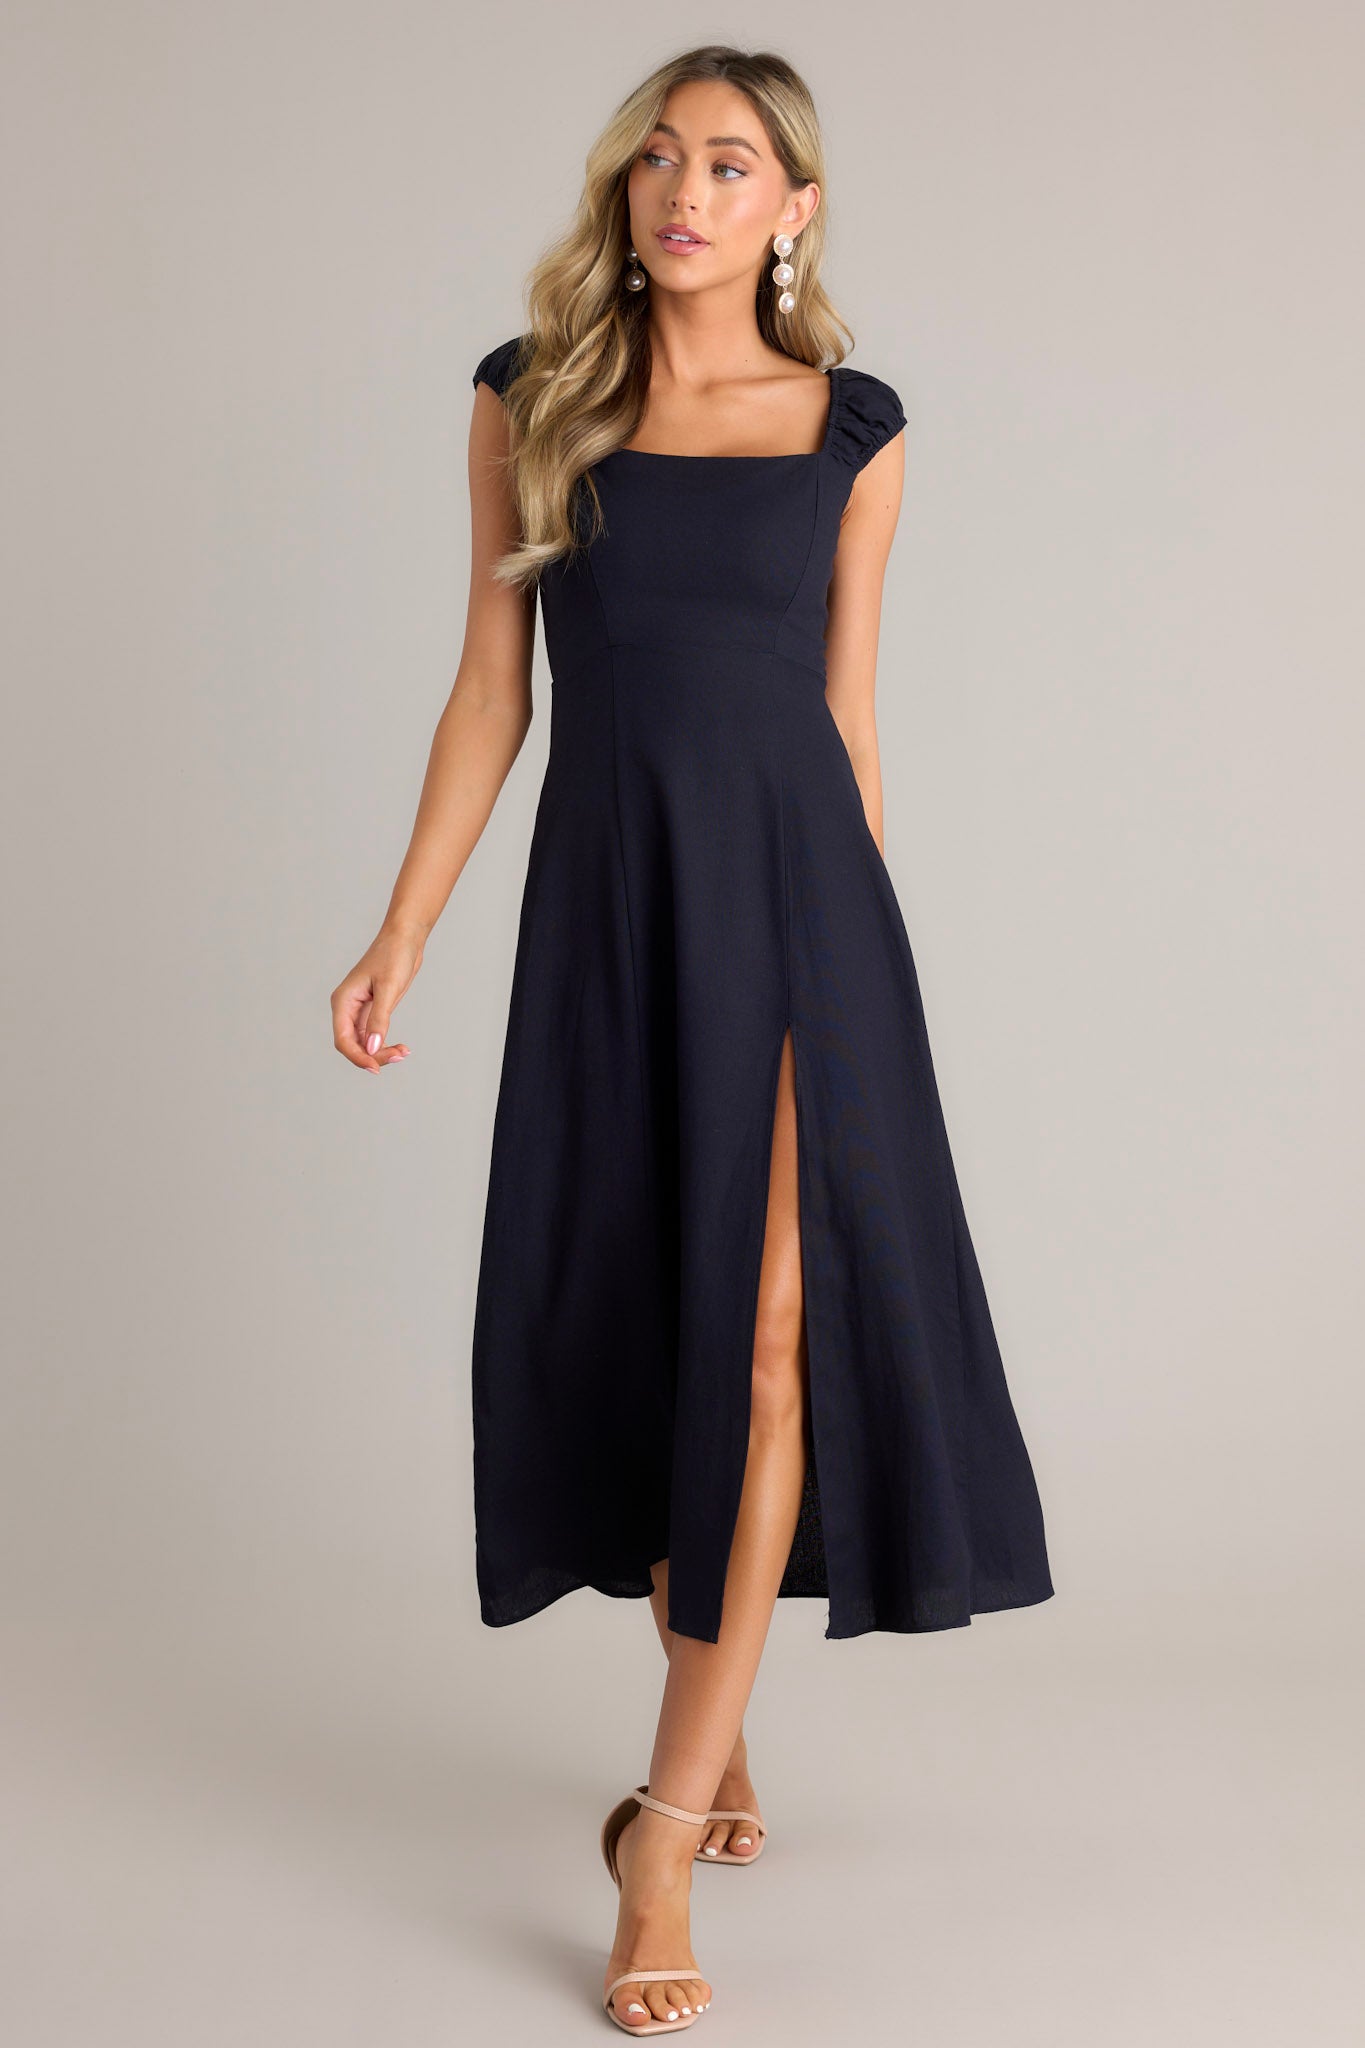 Action shot of a navy midi dress displaying the flow and movement of the skirt, highlighting the square neckline, smocked sleeves, and slit up the leg.